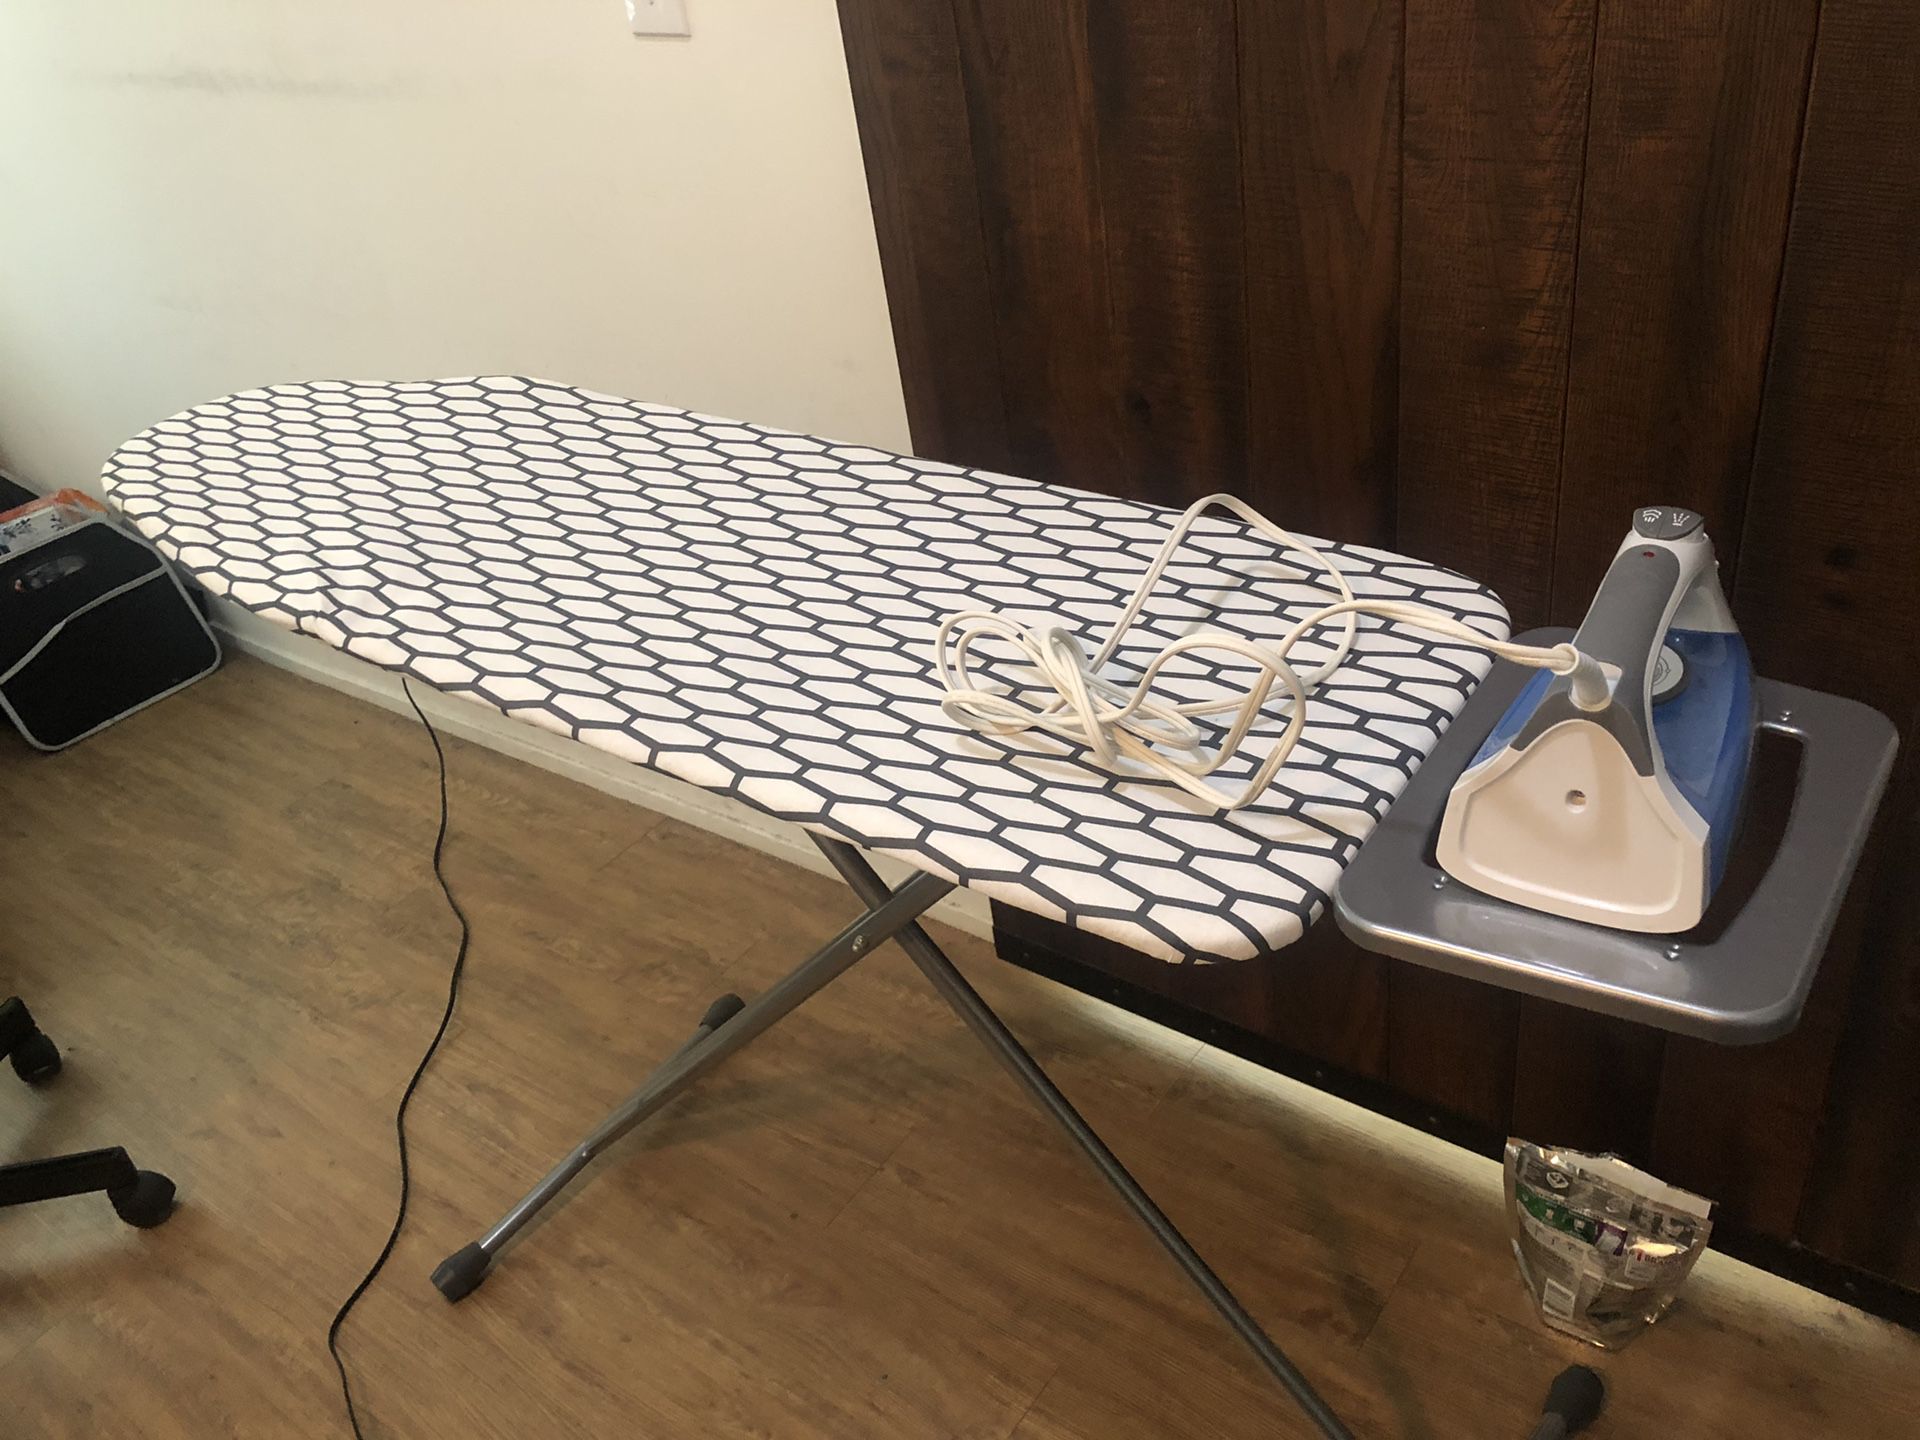 Iron (Viasonic) with Ironing board (IKEA) used only few times